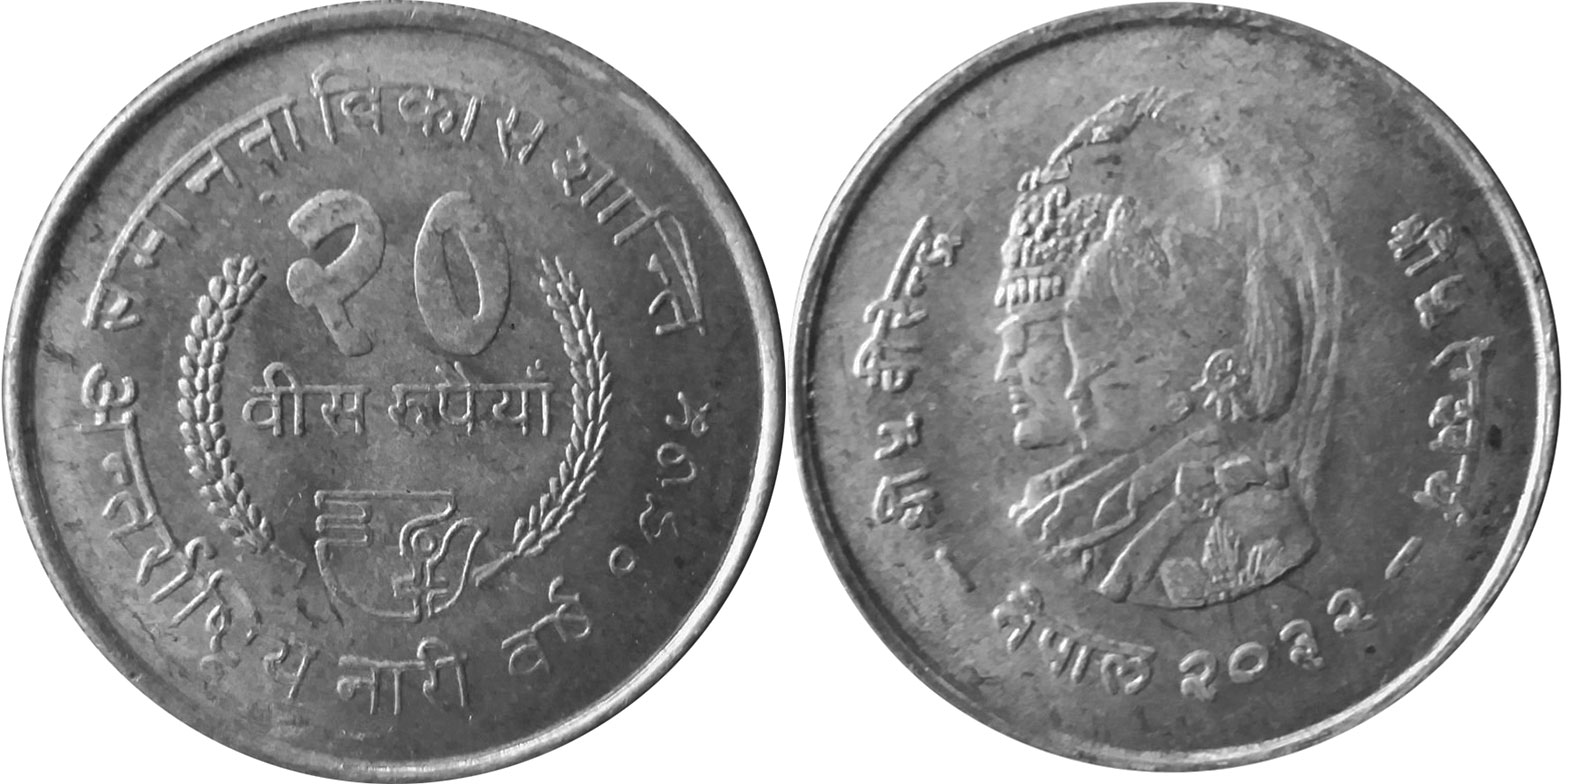 COMMEMORATIVE COPPER NICKEL 1 RUPEE COIN INDIA COIN CARE FOR THE GIRL CHILD 